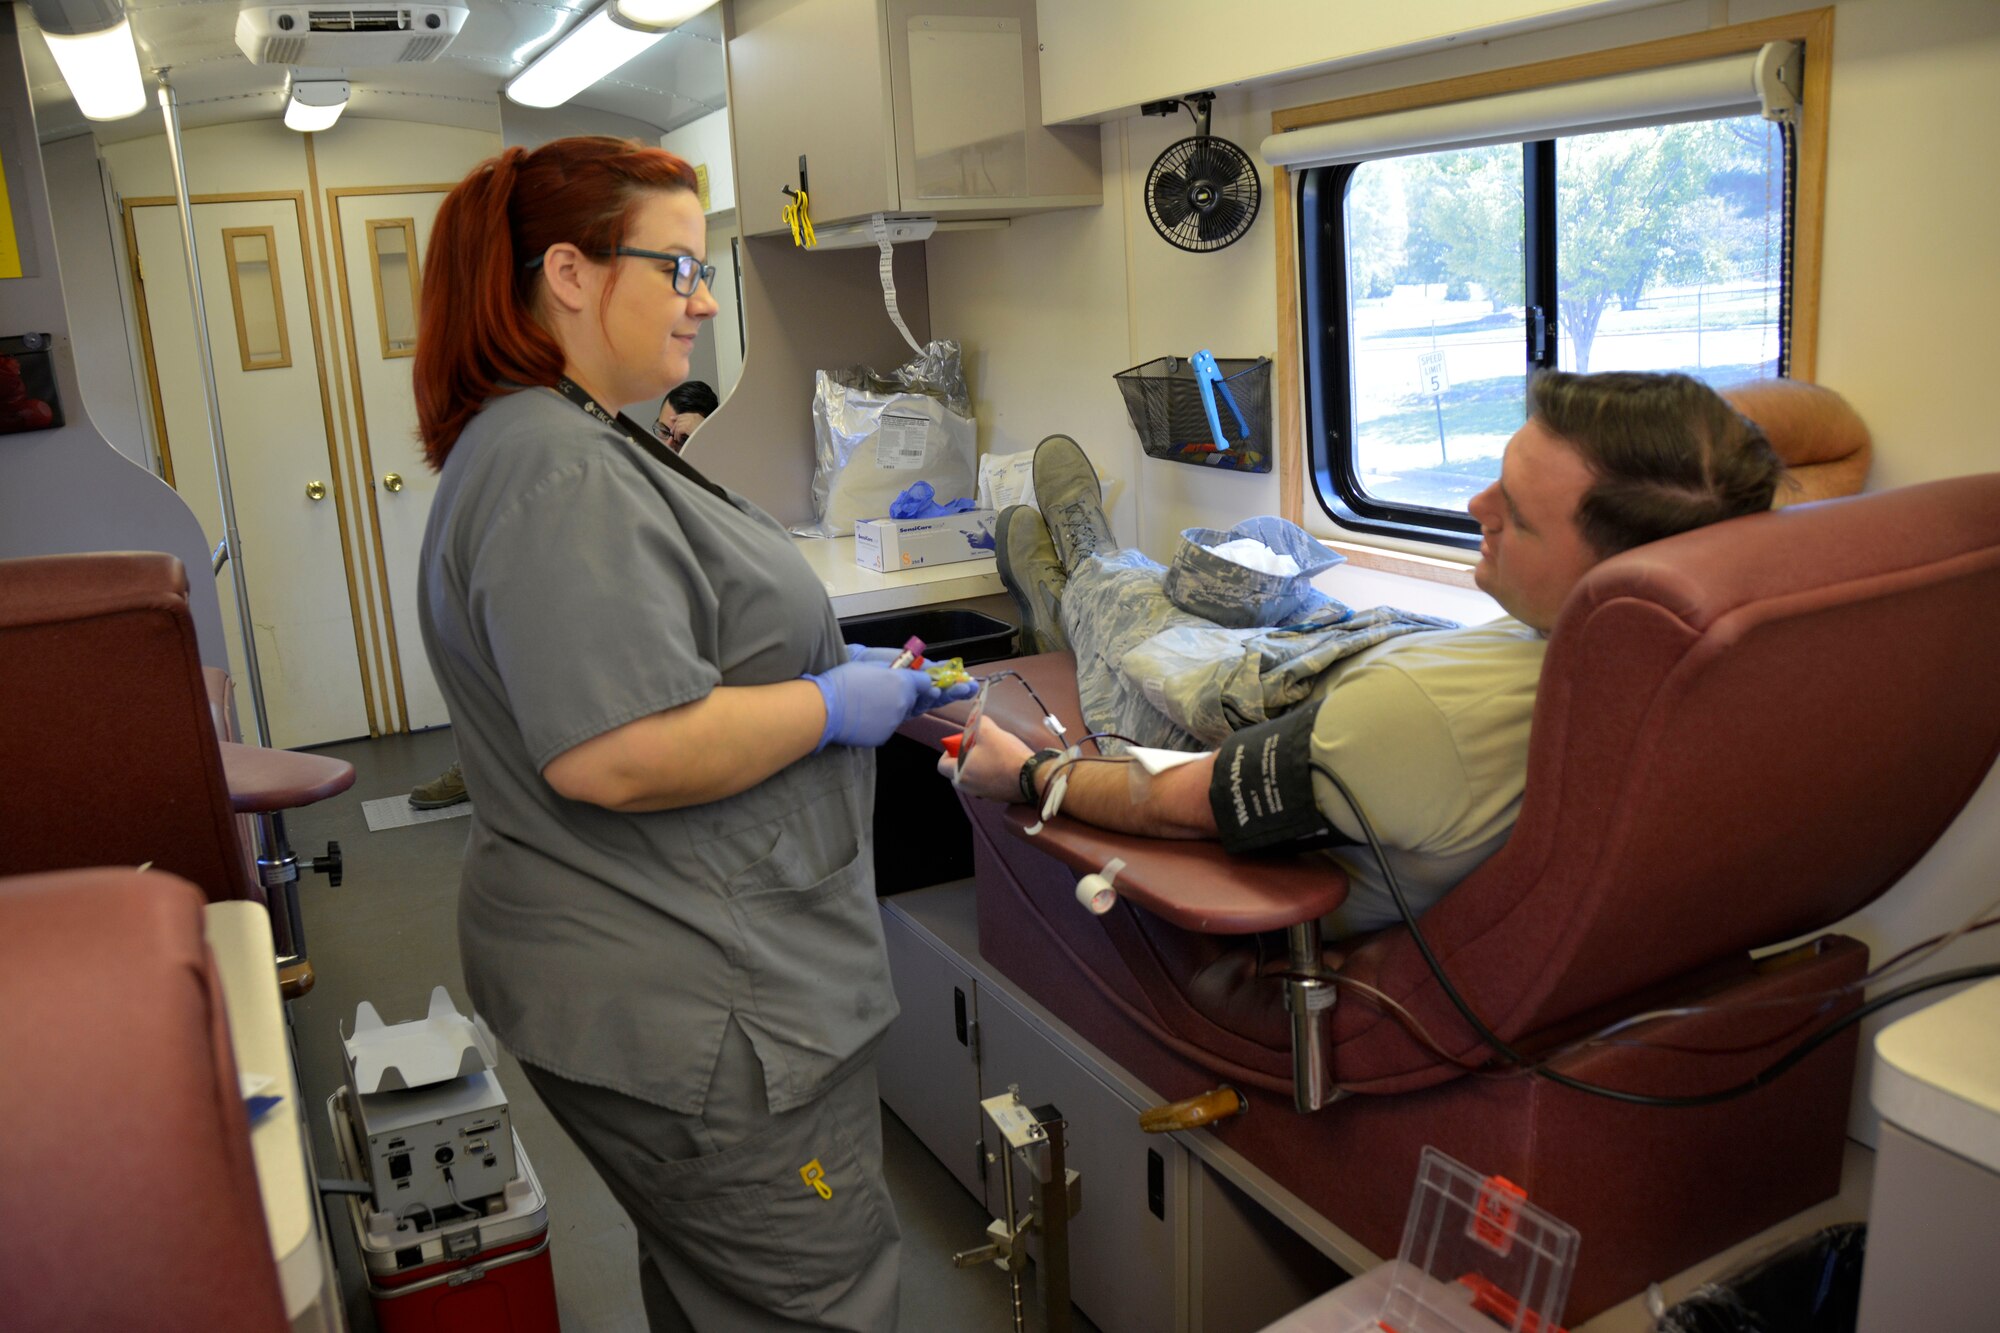 Ashley Gilbertson, mobile team leader for Community Blood Center of the Carolinas, (CBCC), draws blood from U.S. Air Force Staff Sgt. Matthew Partridge, medical technician with the 145th Medical Group, during a blood drive held at the North Carolina Air National Guard Base, Charlotte Douglas International Airport, April 9, 2016. All blood donated through CBCC goes to help patients in need, who live in the local community. Donating just one pint of blood takes less than an hour but can save up to three lives.  (U.S. Air National Guard photo by Master Sgt. Patricia F. Moran/Released)